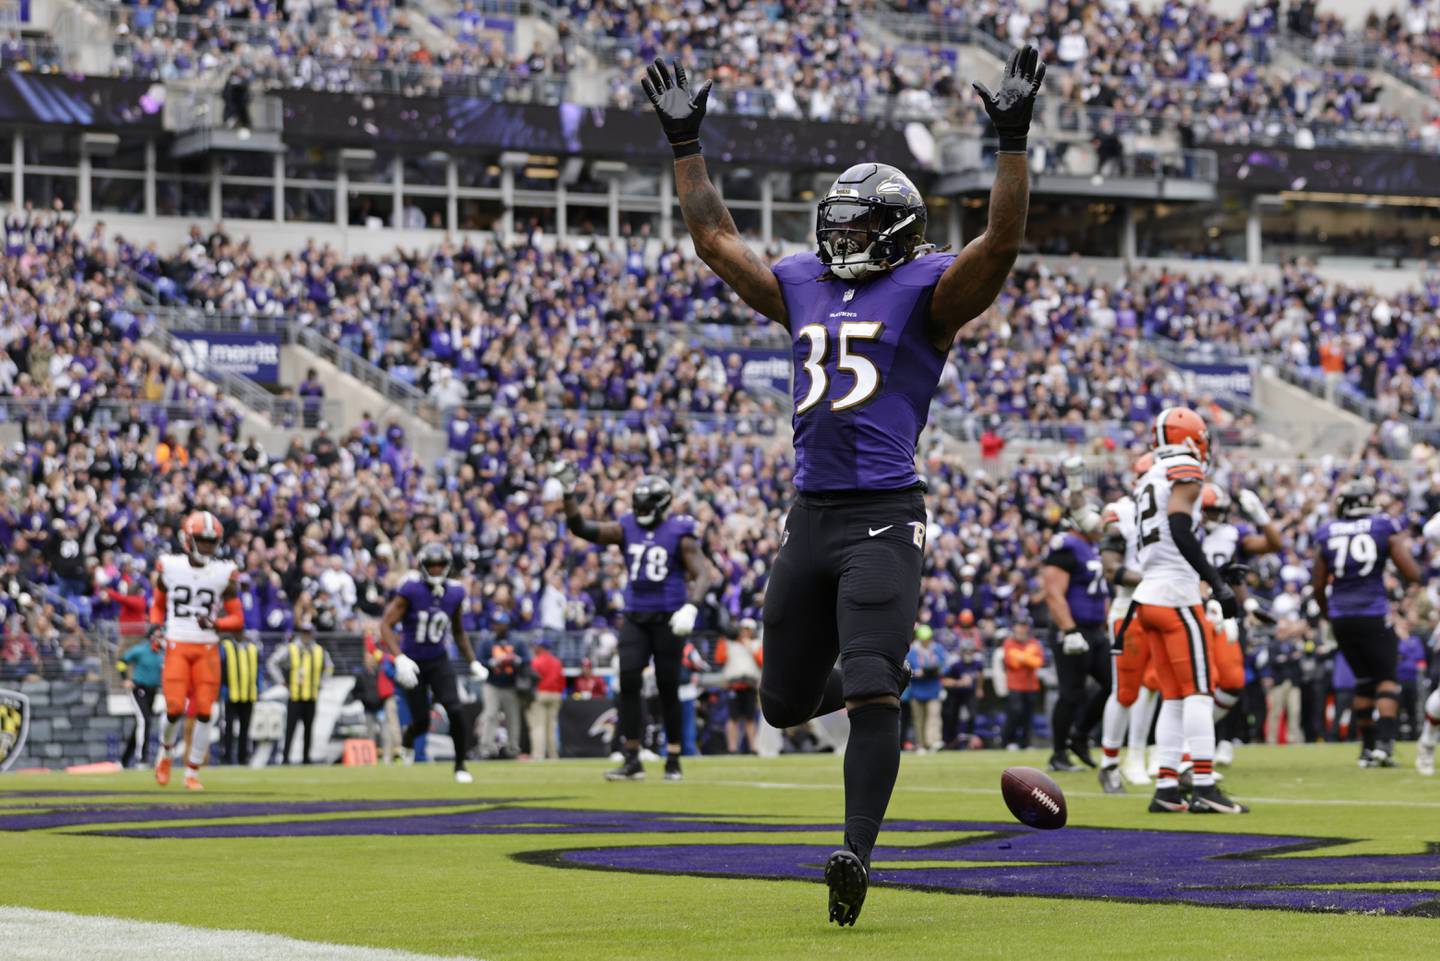 Baltimore Ravens running back Gus Edwards (35) celebrates after scoring a touchdown on a 7 yard run during the second quarter against the Cleveland Browns in an NFL football game, Sunday, Oct. 23, 2022, in Baltimore.